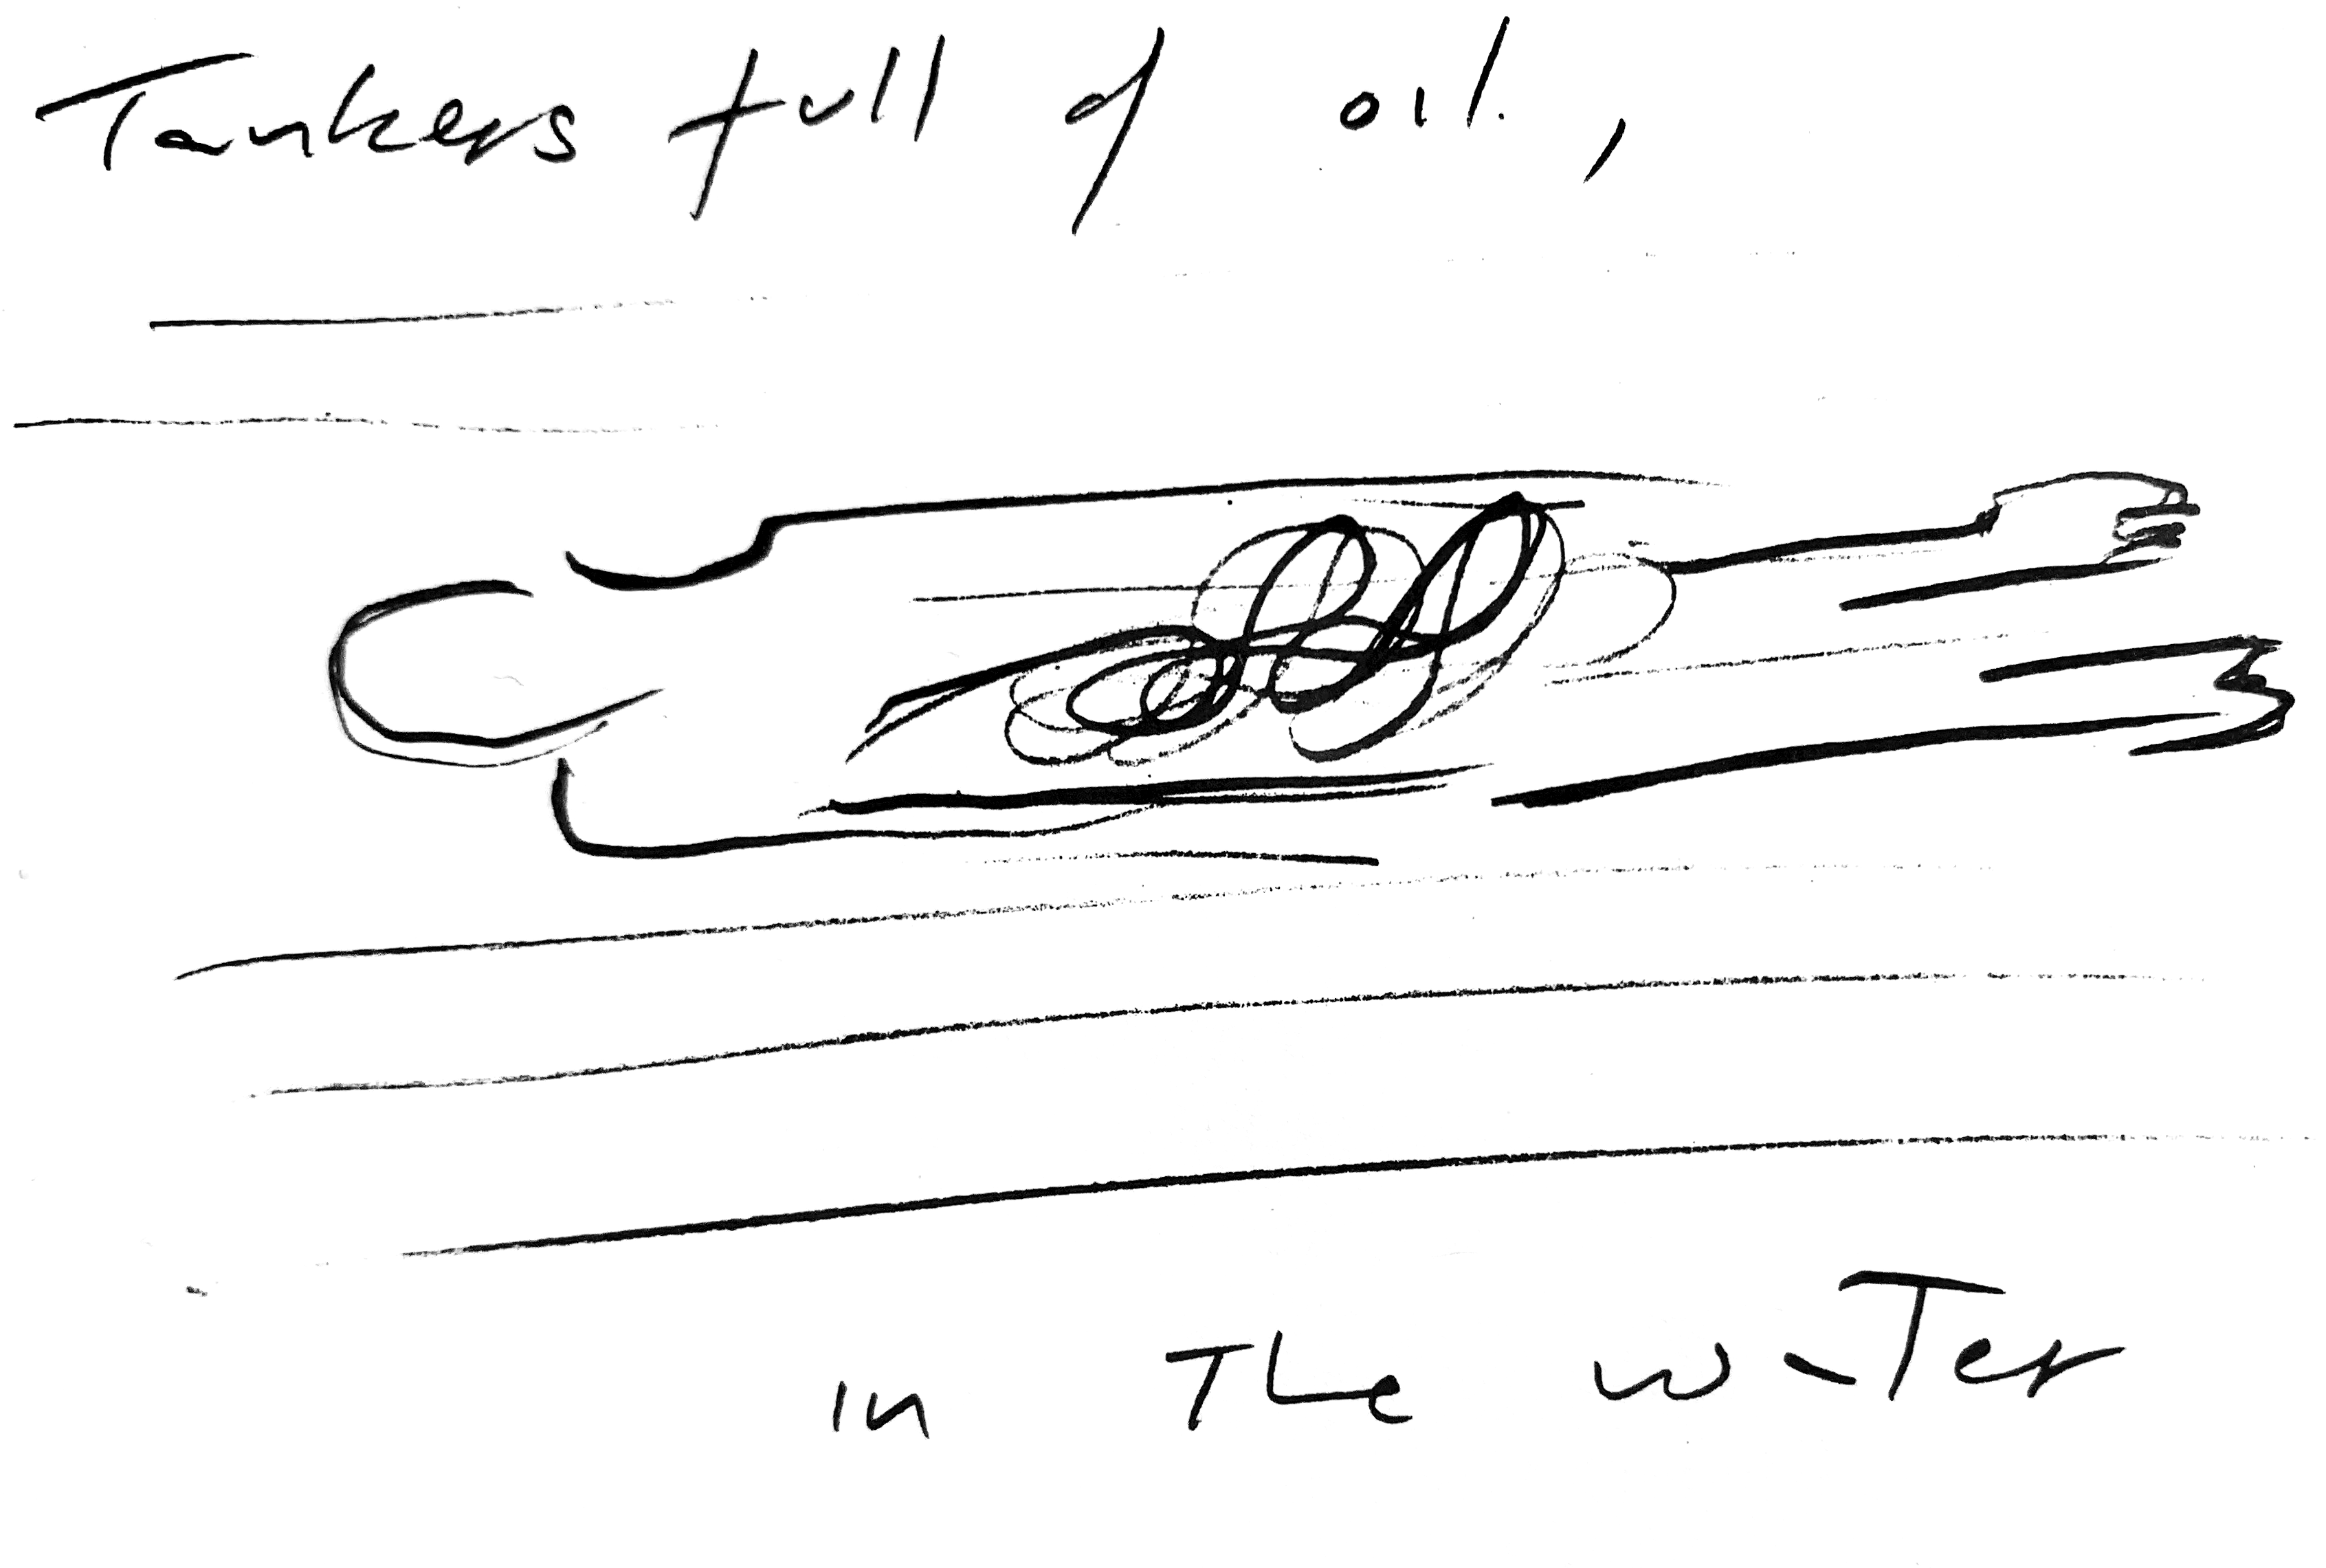 A person on the floor depicting 'tankers full of oil, in the water' -- drawing by Simone Forti